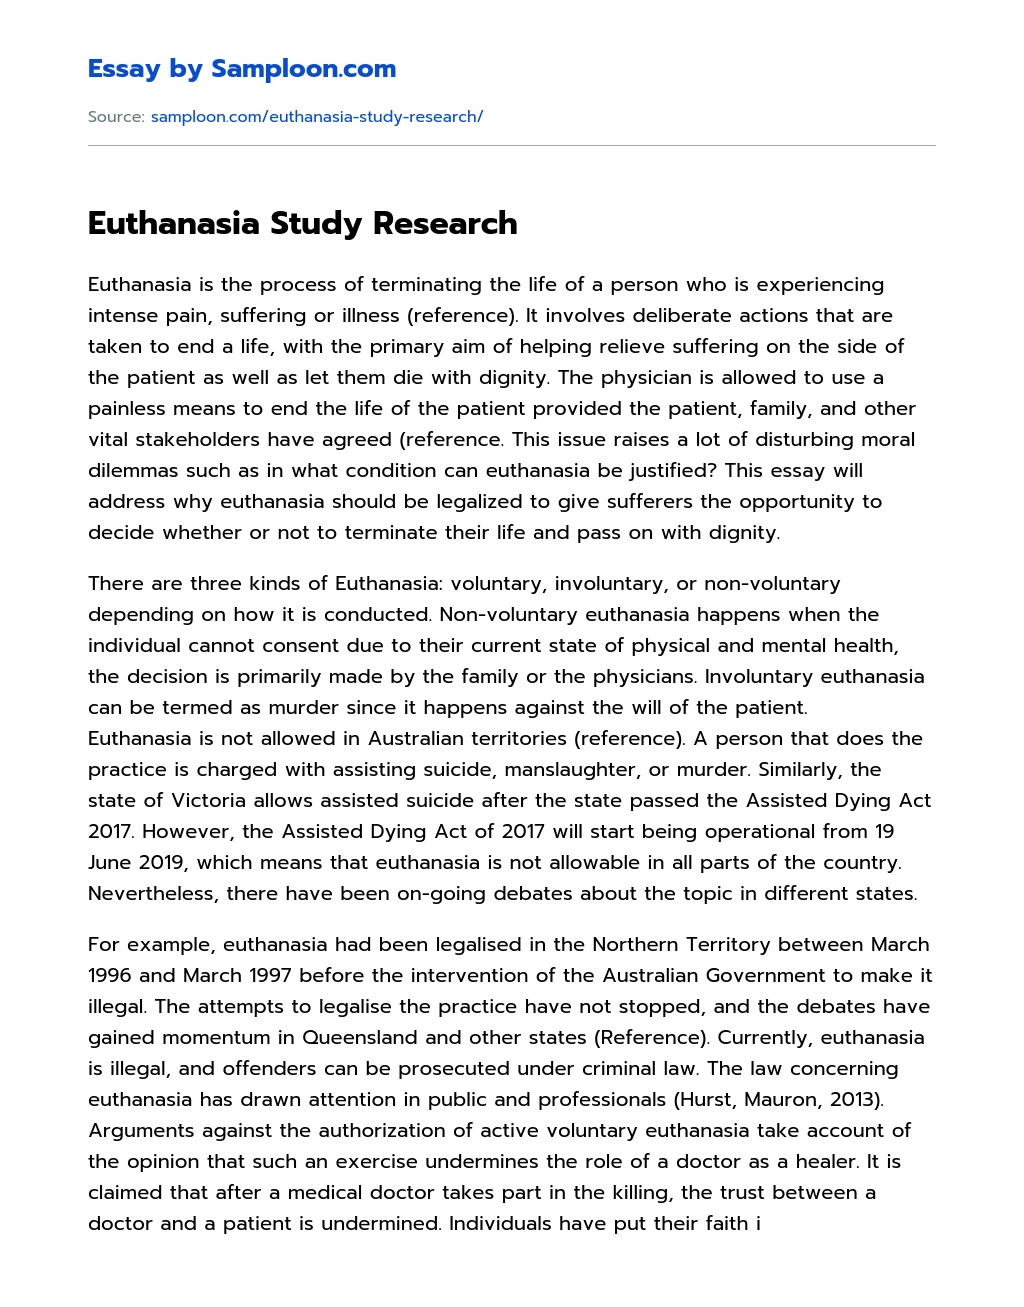 Euthanasia Study Research essay